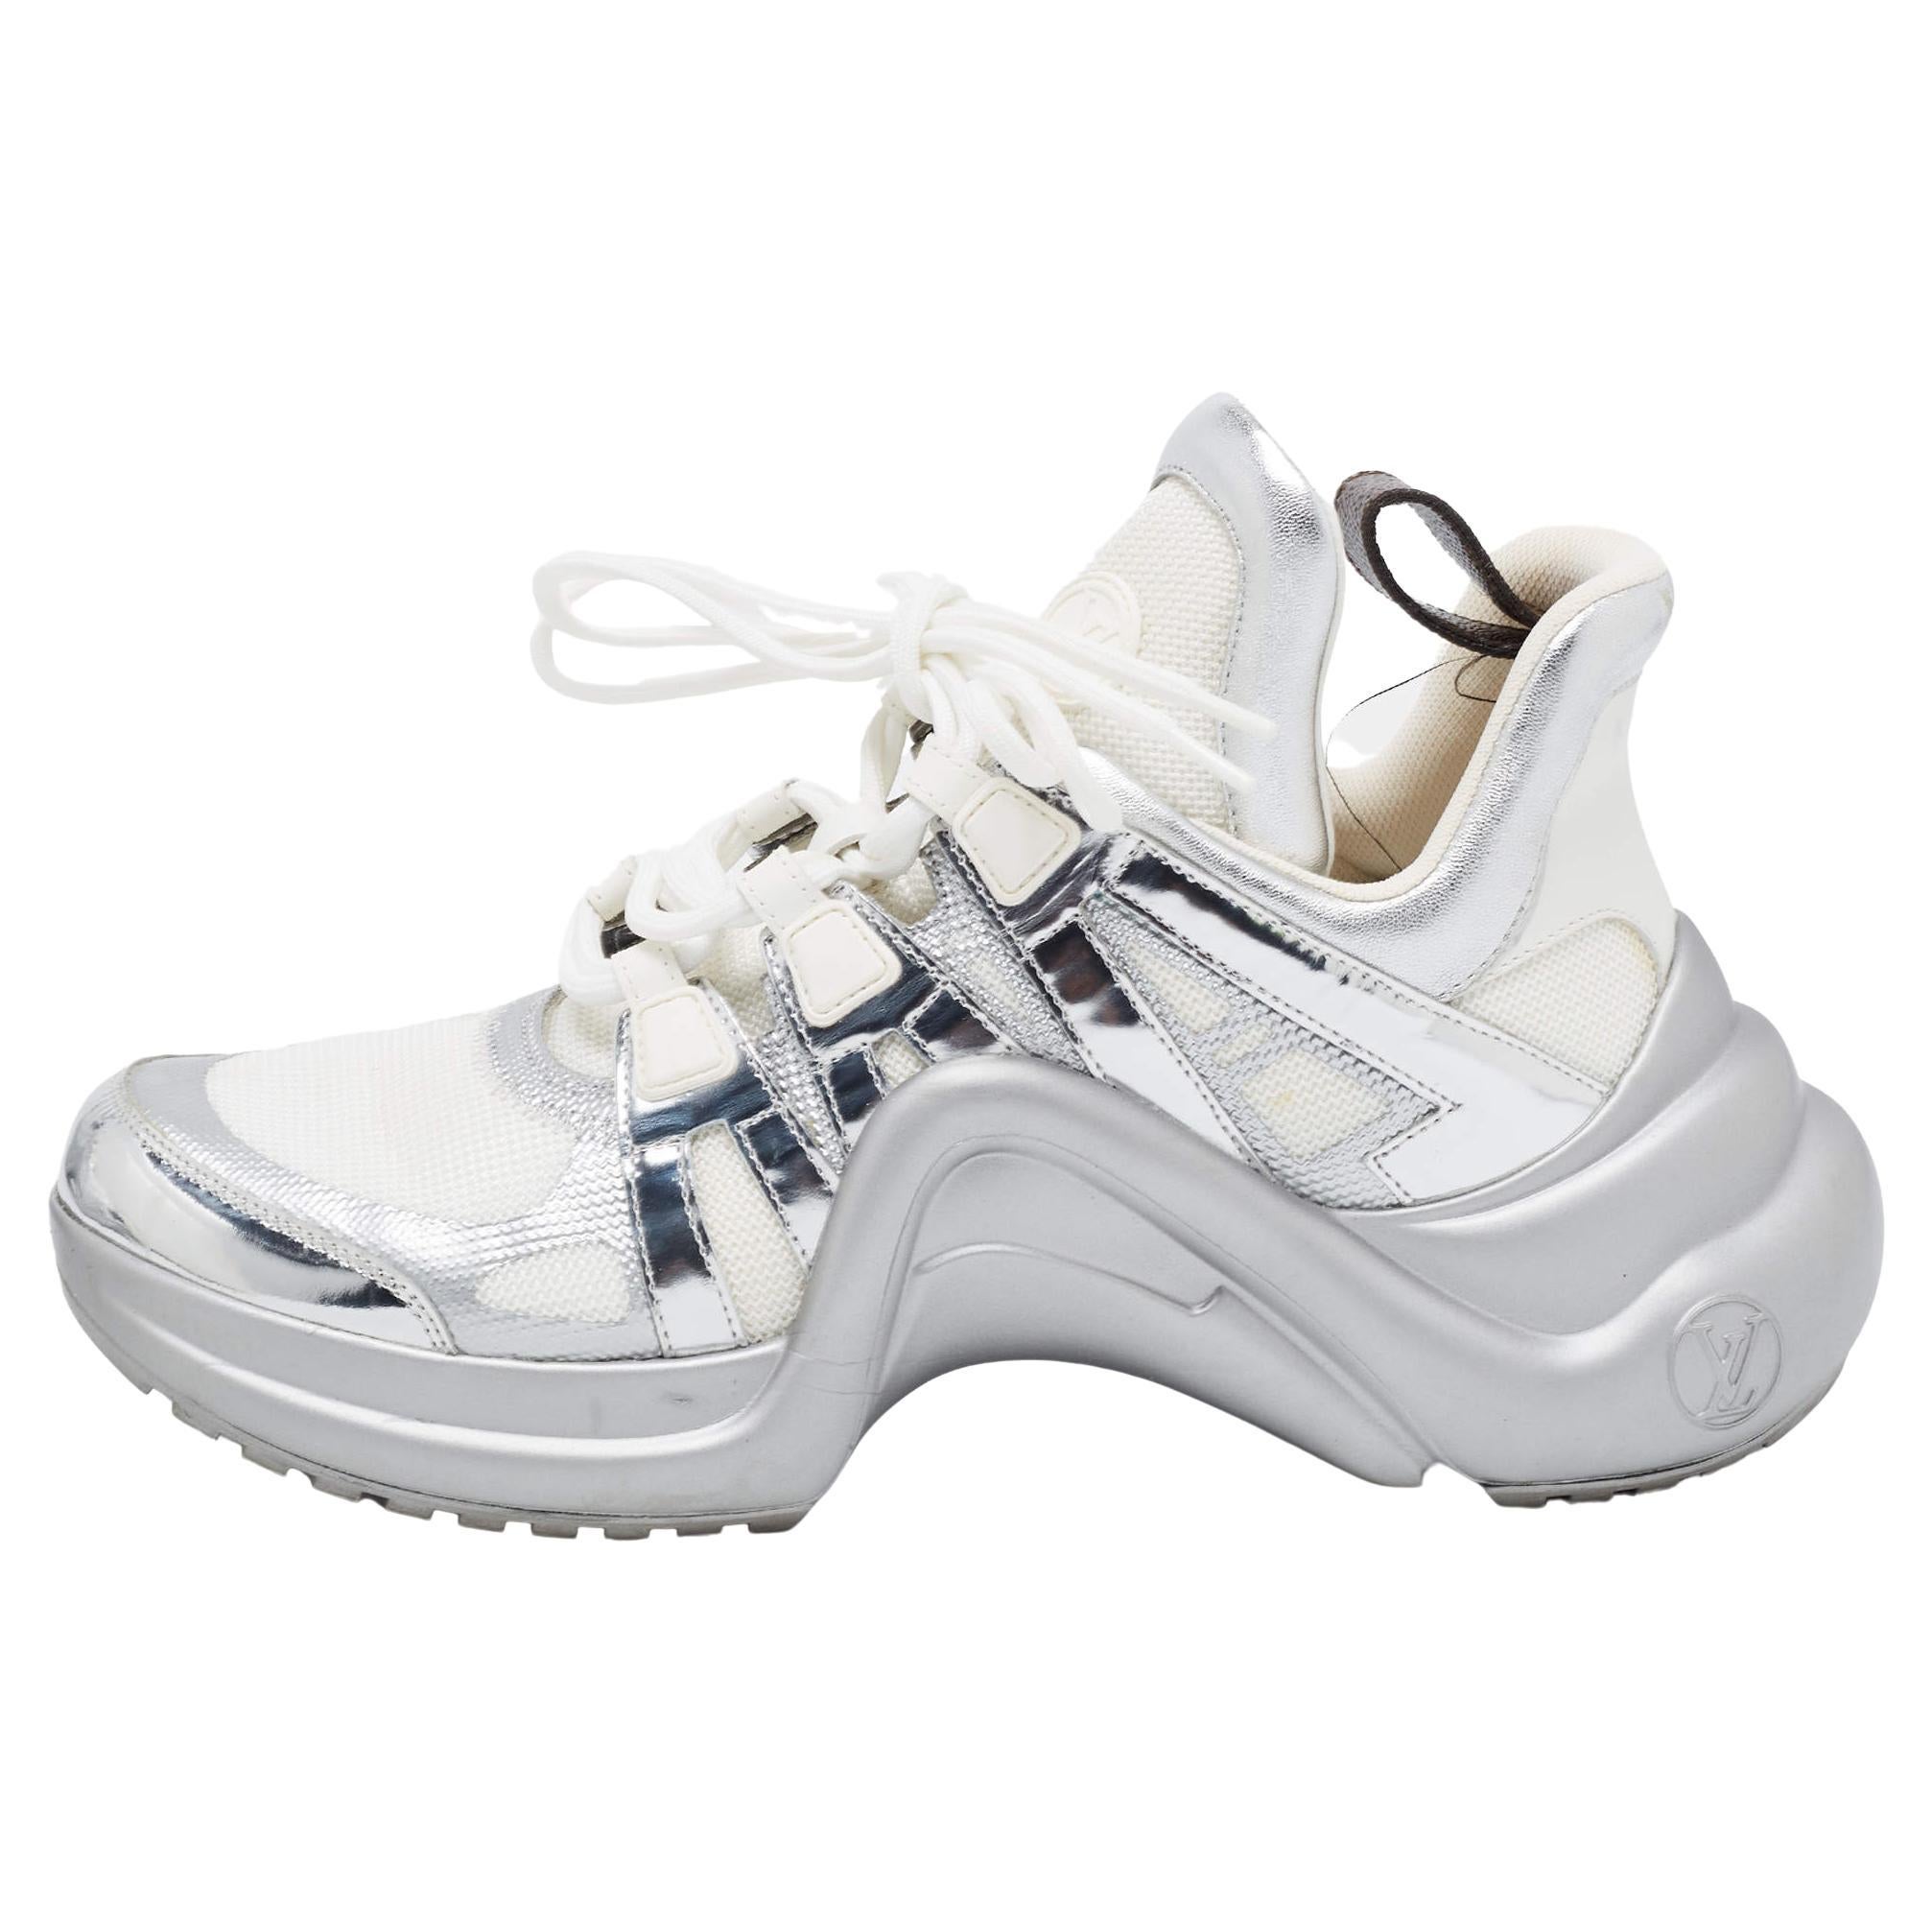 Louis Vuitton White/Silver Mesh and Leather Archlight Sneakers